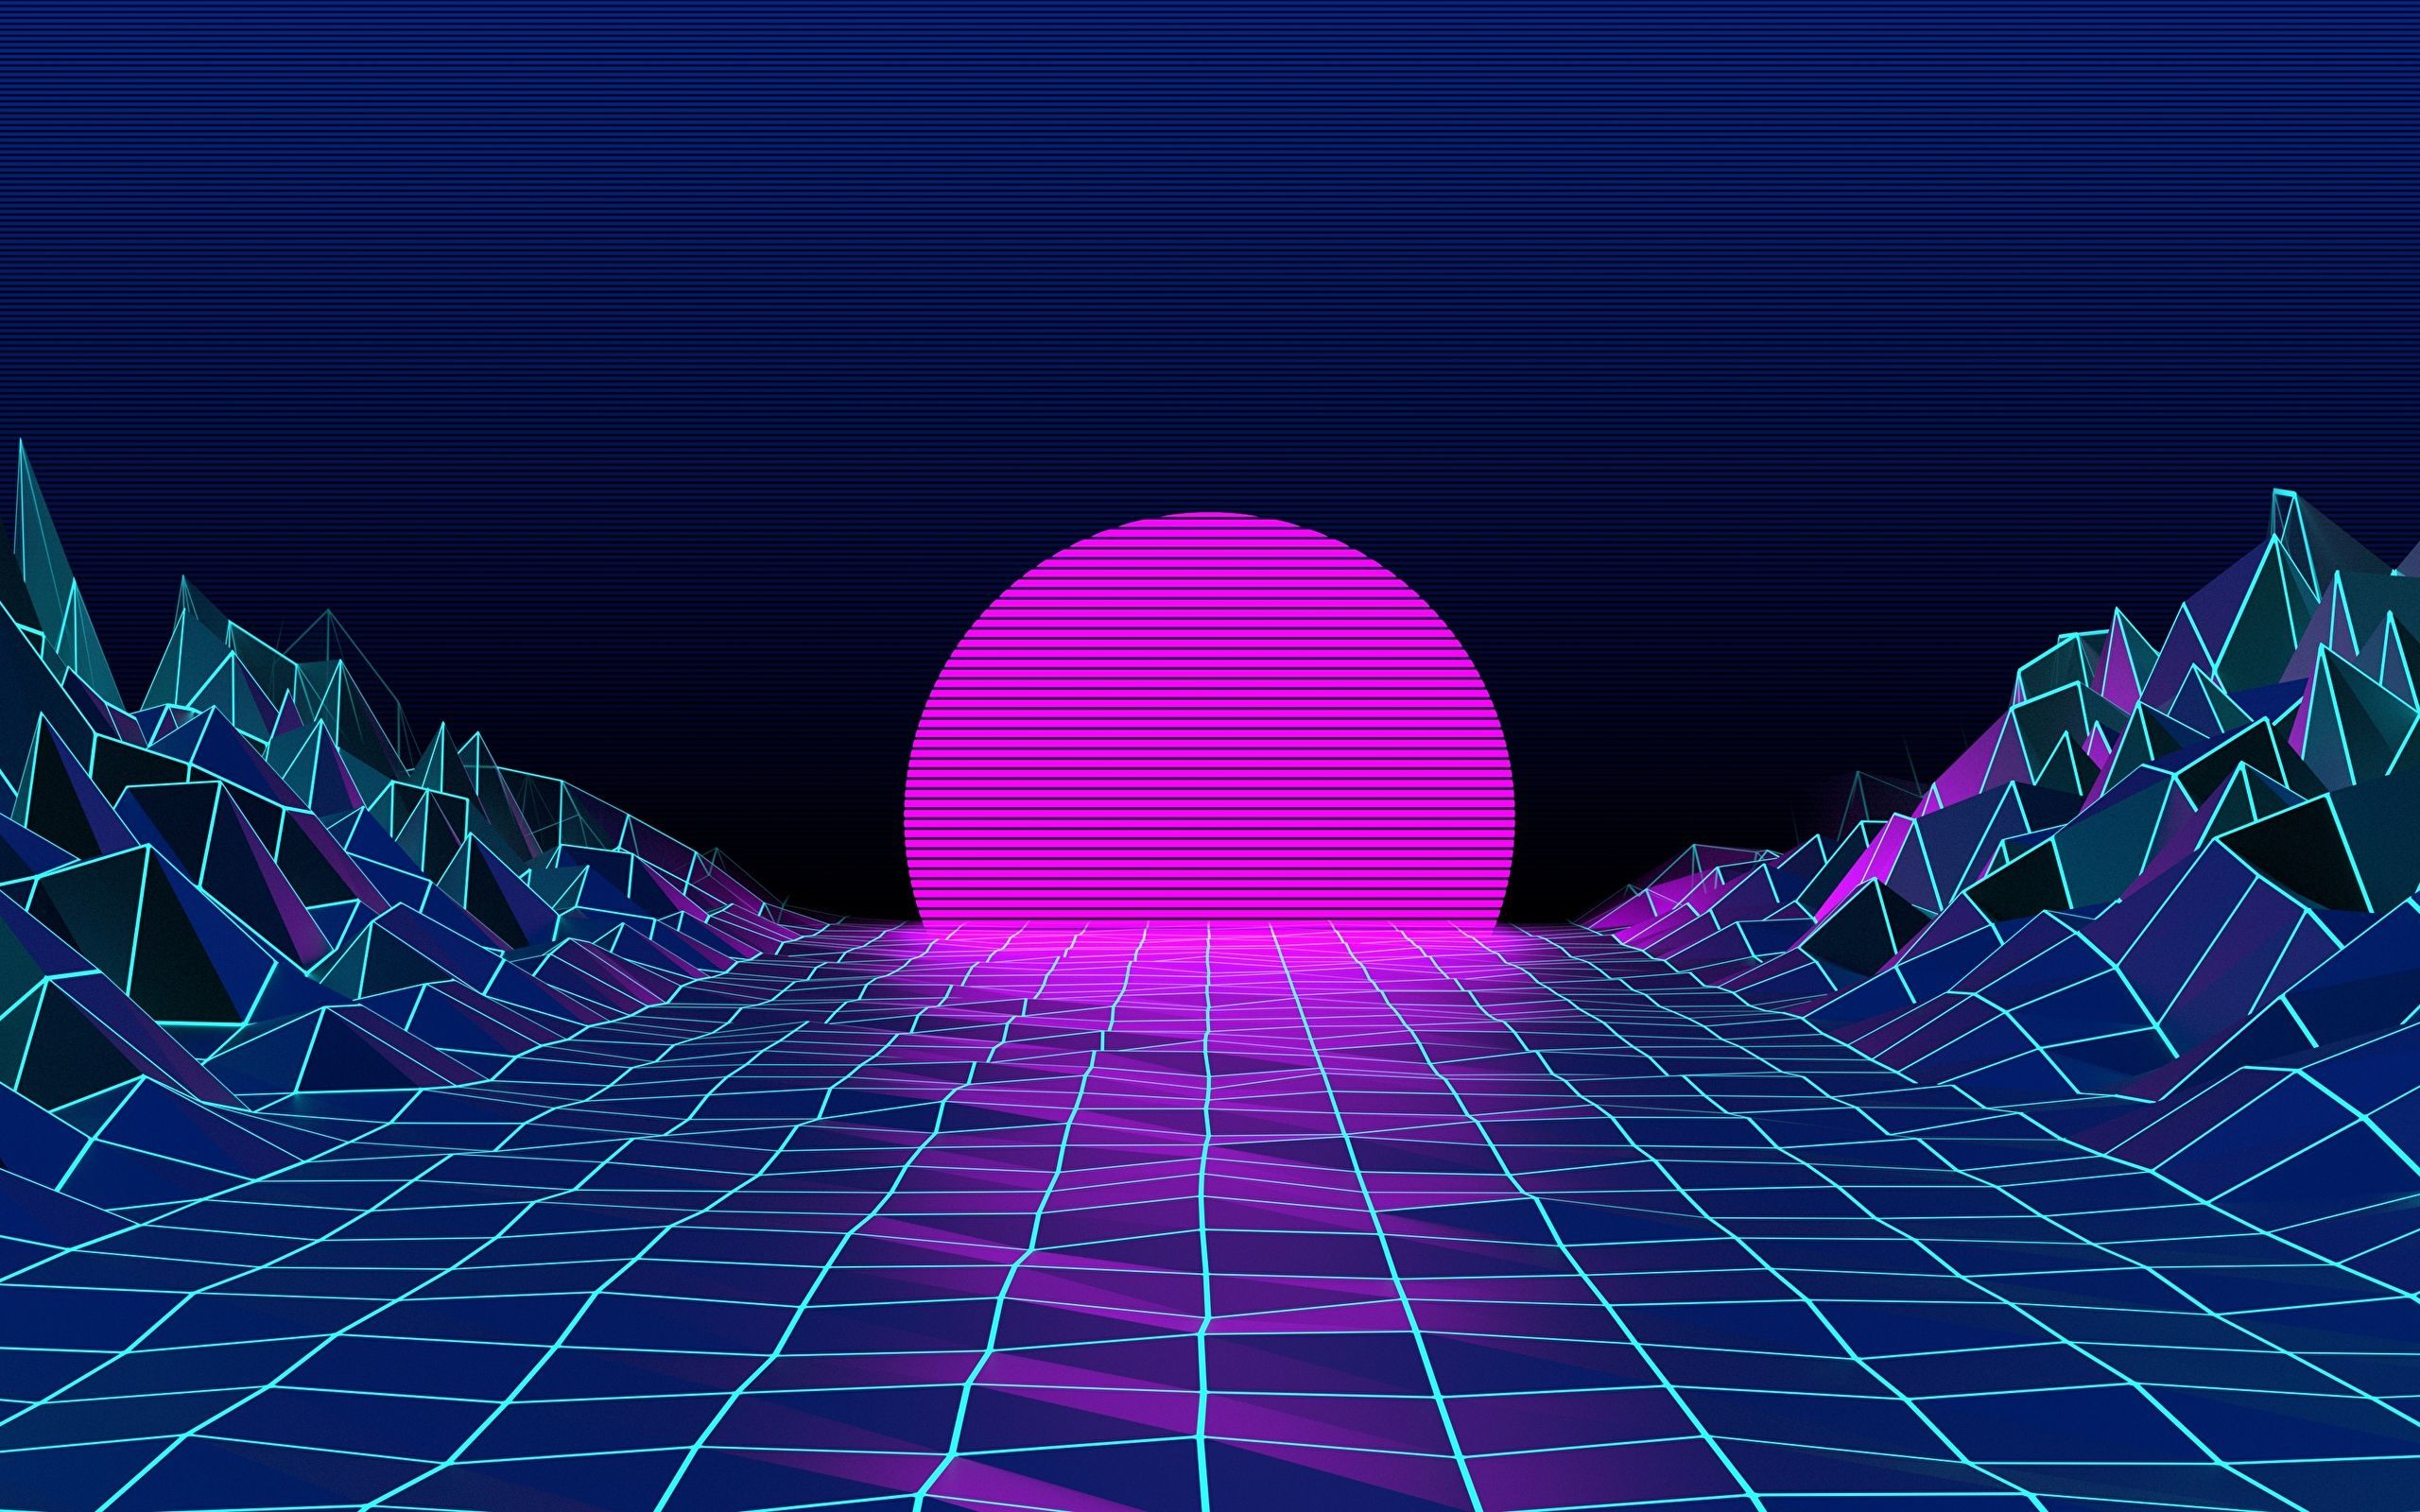 A neon colored background with mountains and an egg - 2560x1600